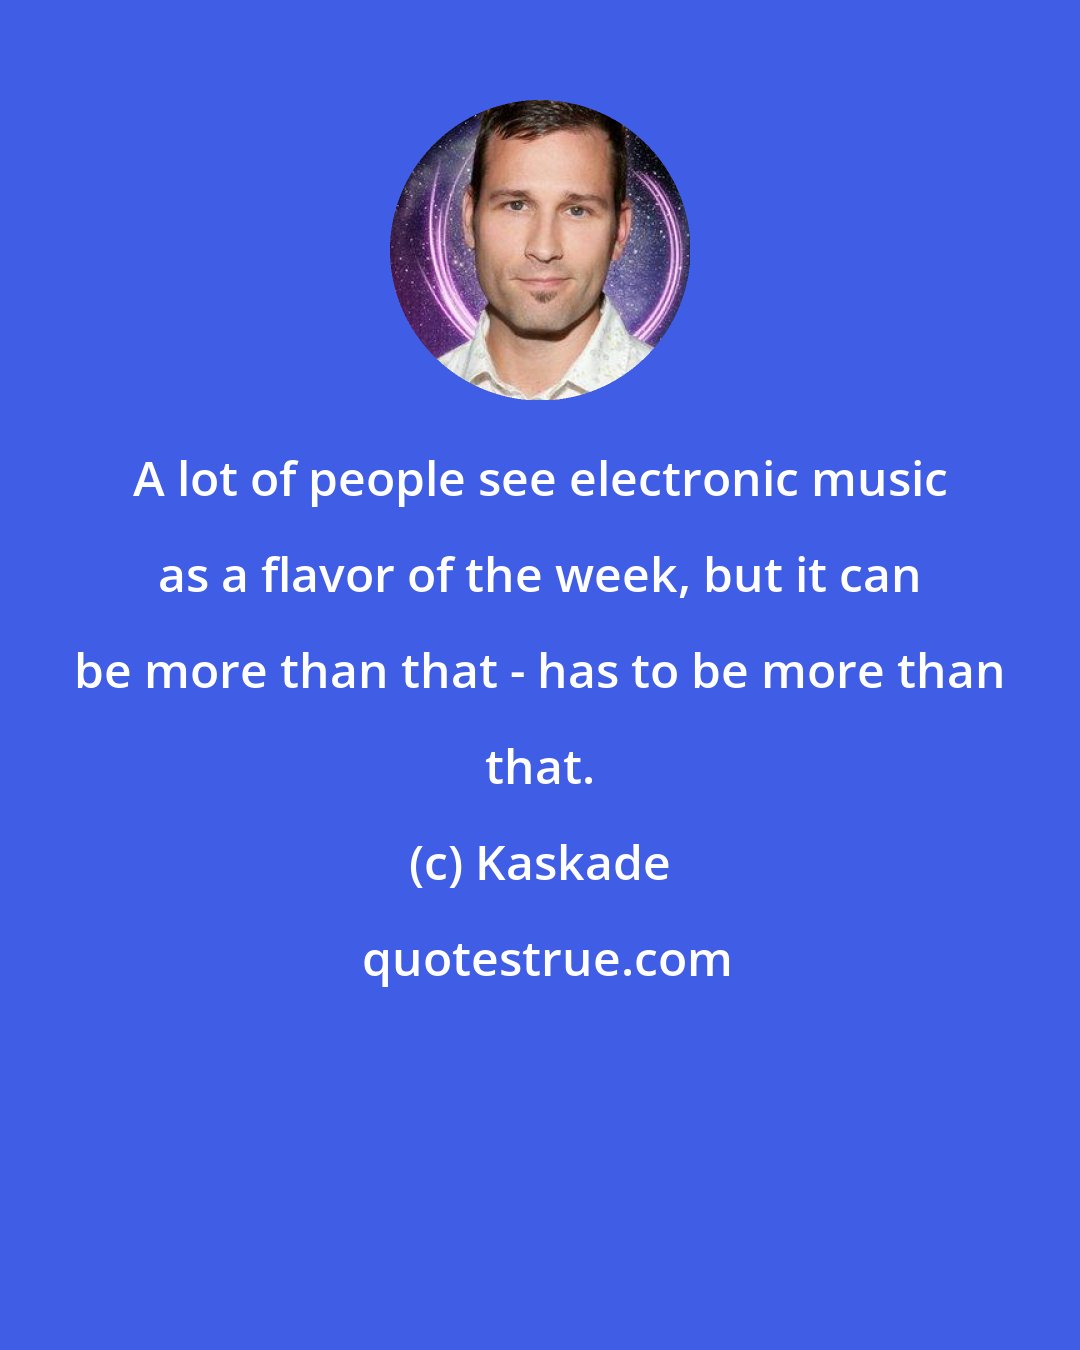 Kaskade: A lot of people see electronic music as a flavor of the week, but it can be more than that - has to be more than that.